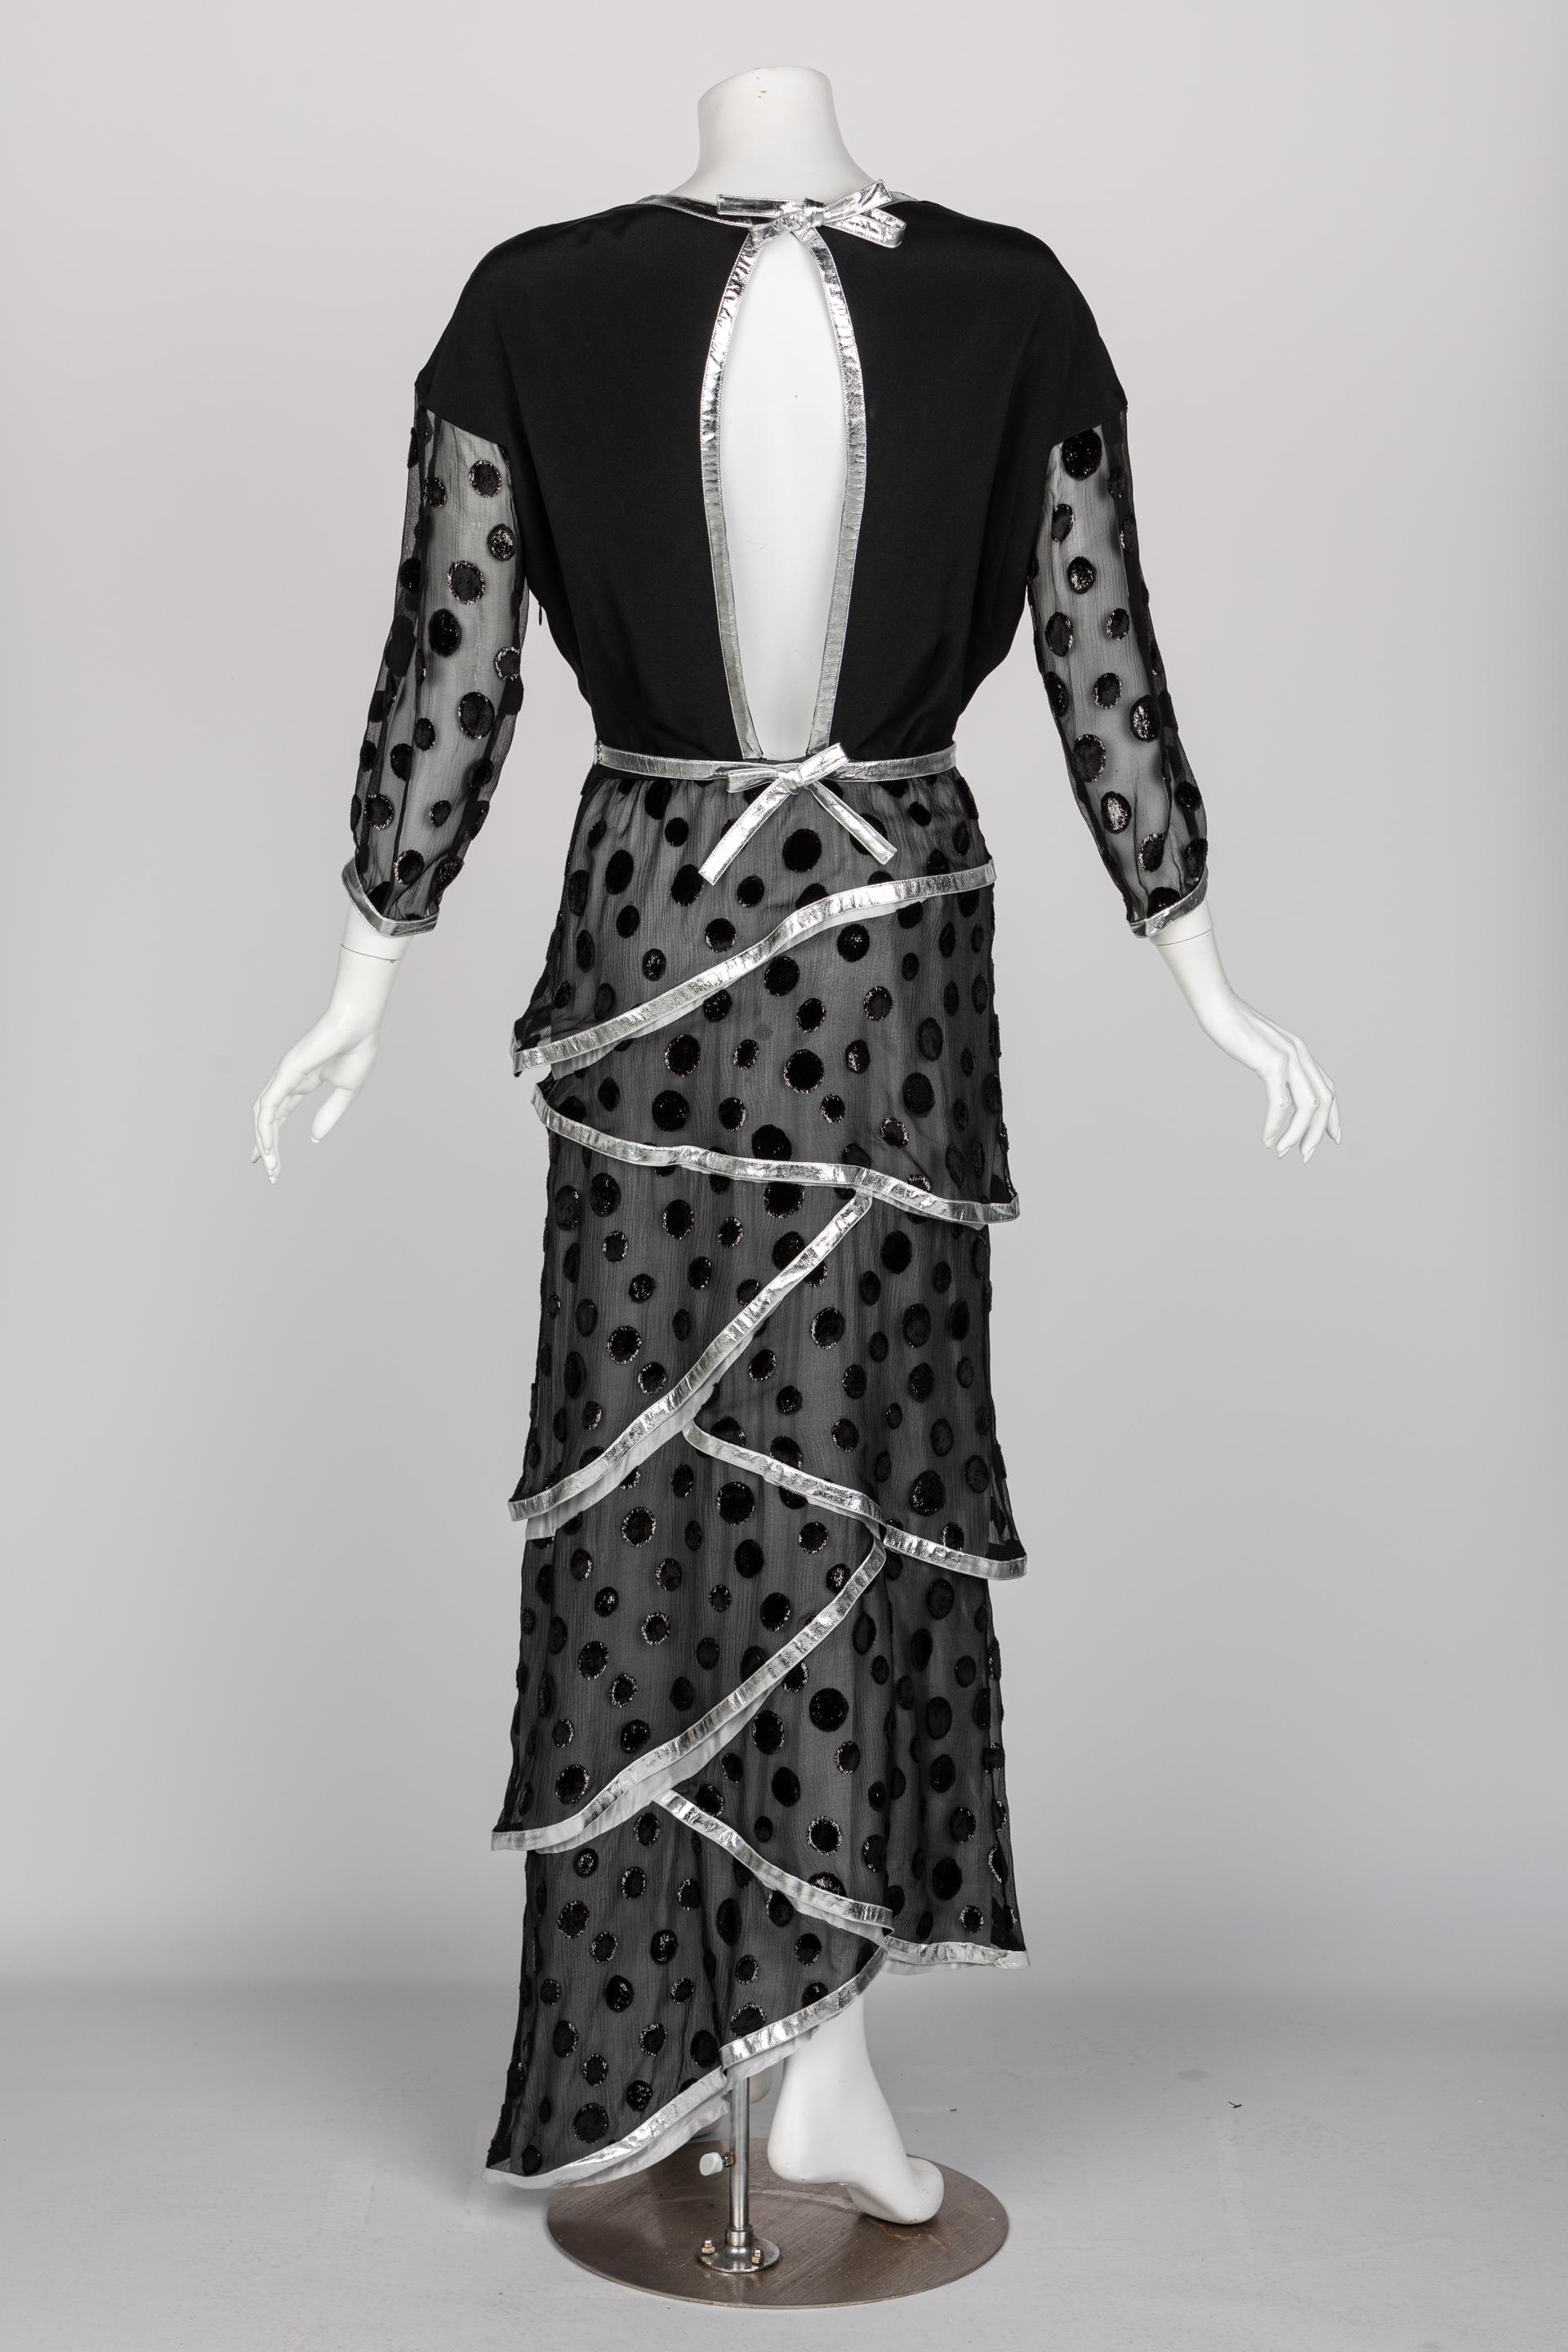 Courrèges Black Metallic Polka Dot Layered Maxi Dress, 1970s In Excellent Condition For Sale In Boca Raton, FL